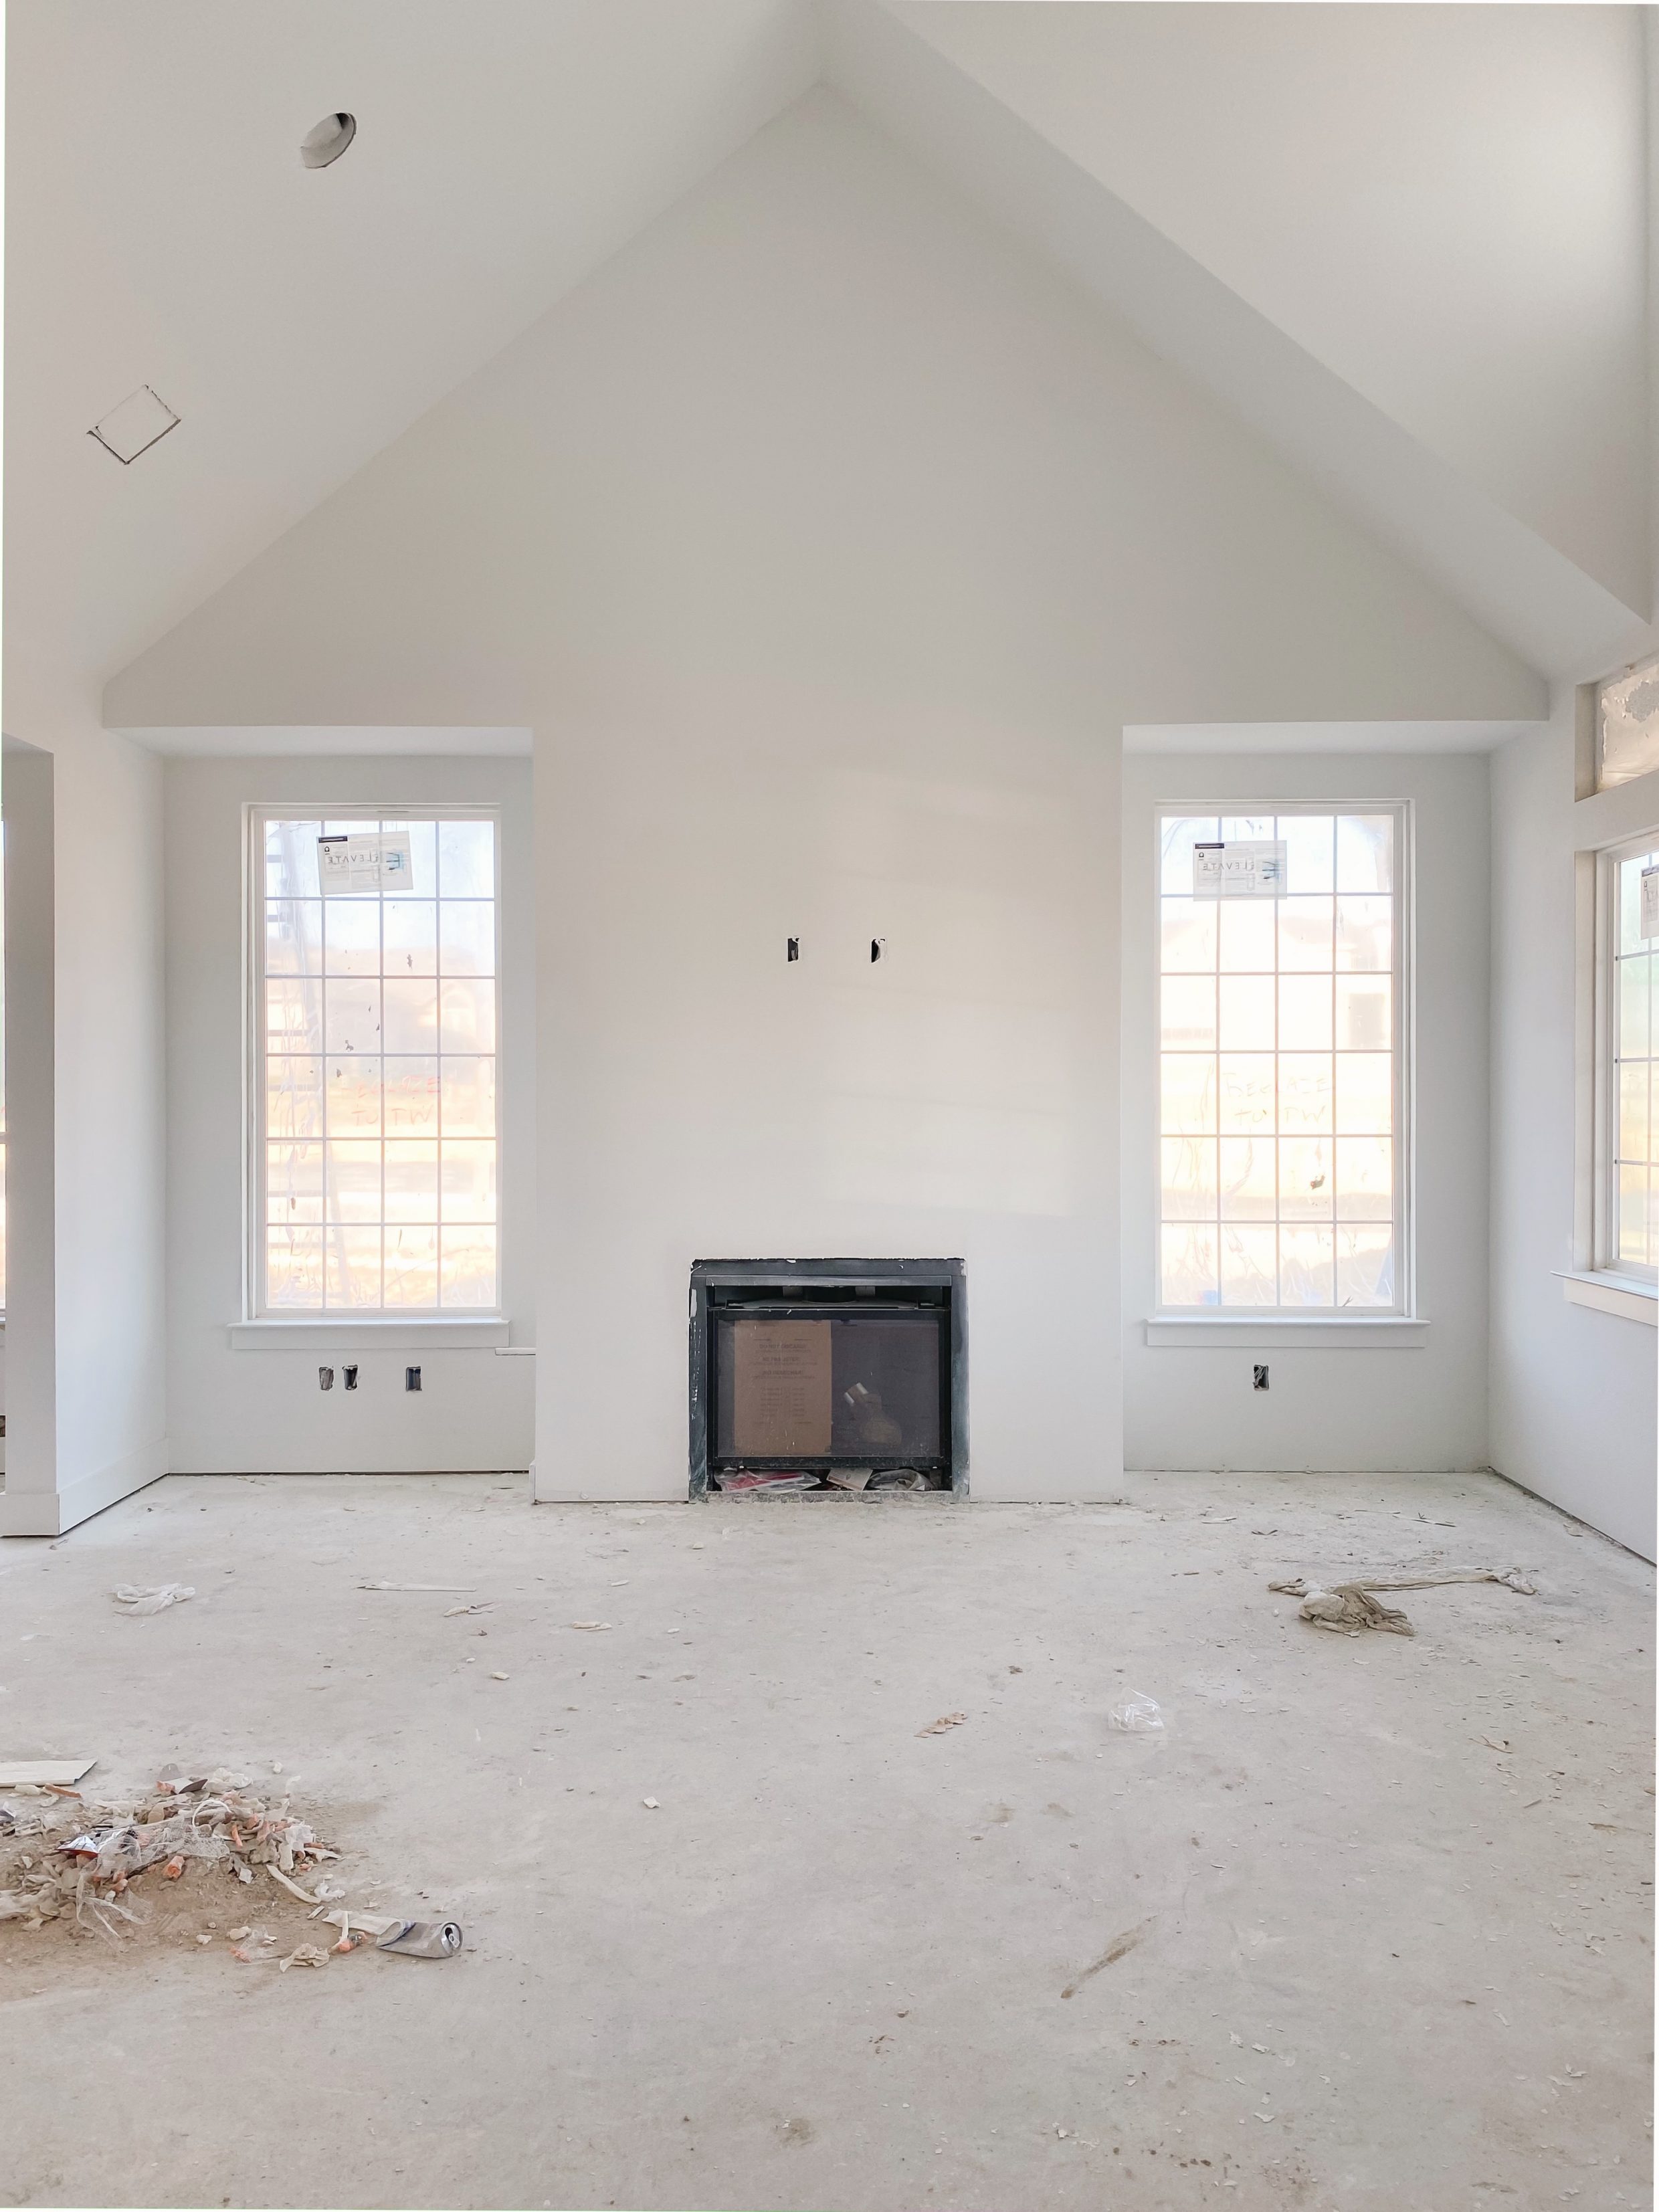 Vaulted ceilings in a living room with picture windows flanking the fire place of a one-story new build home in Dallas under construction